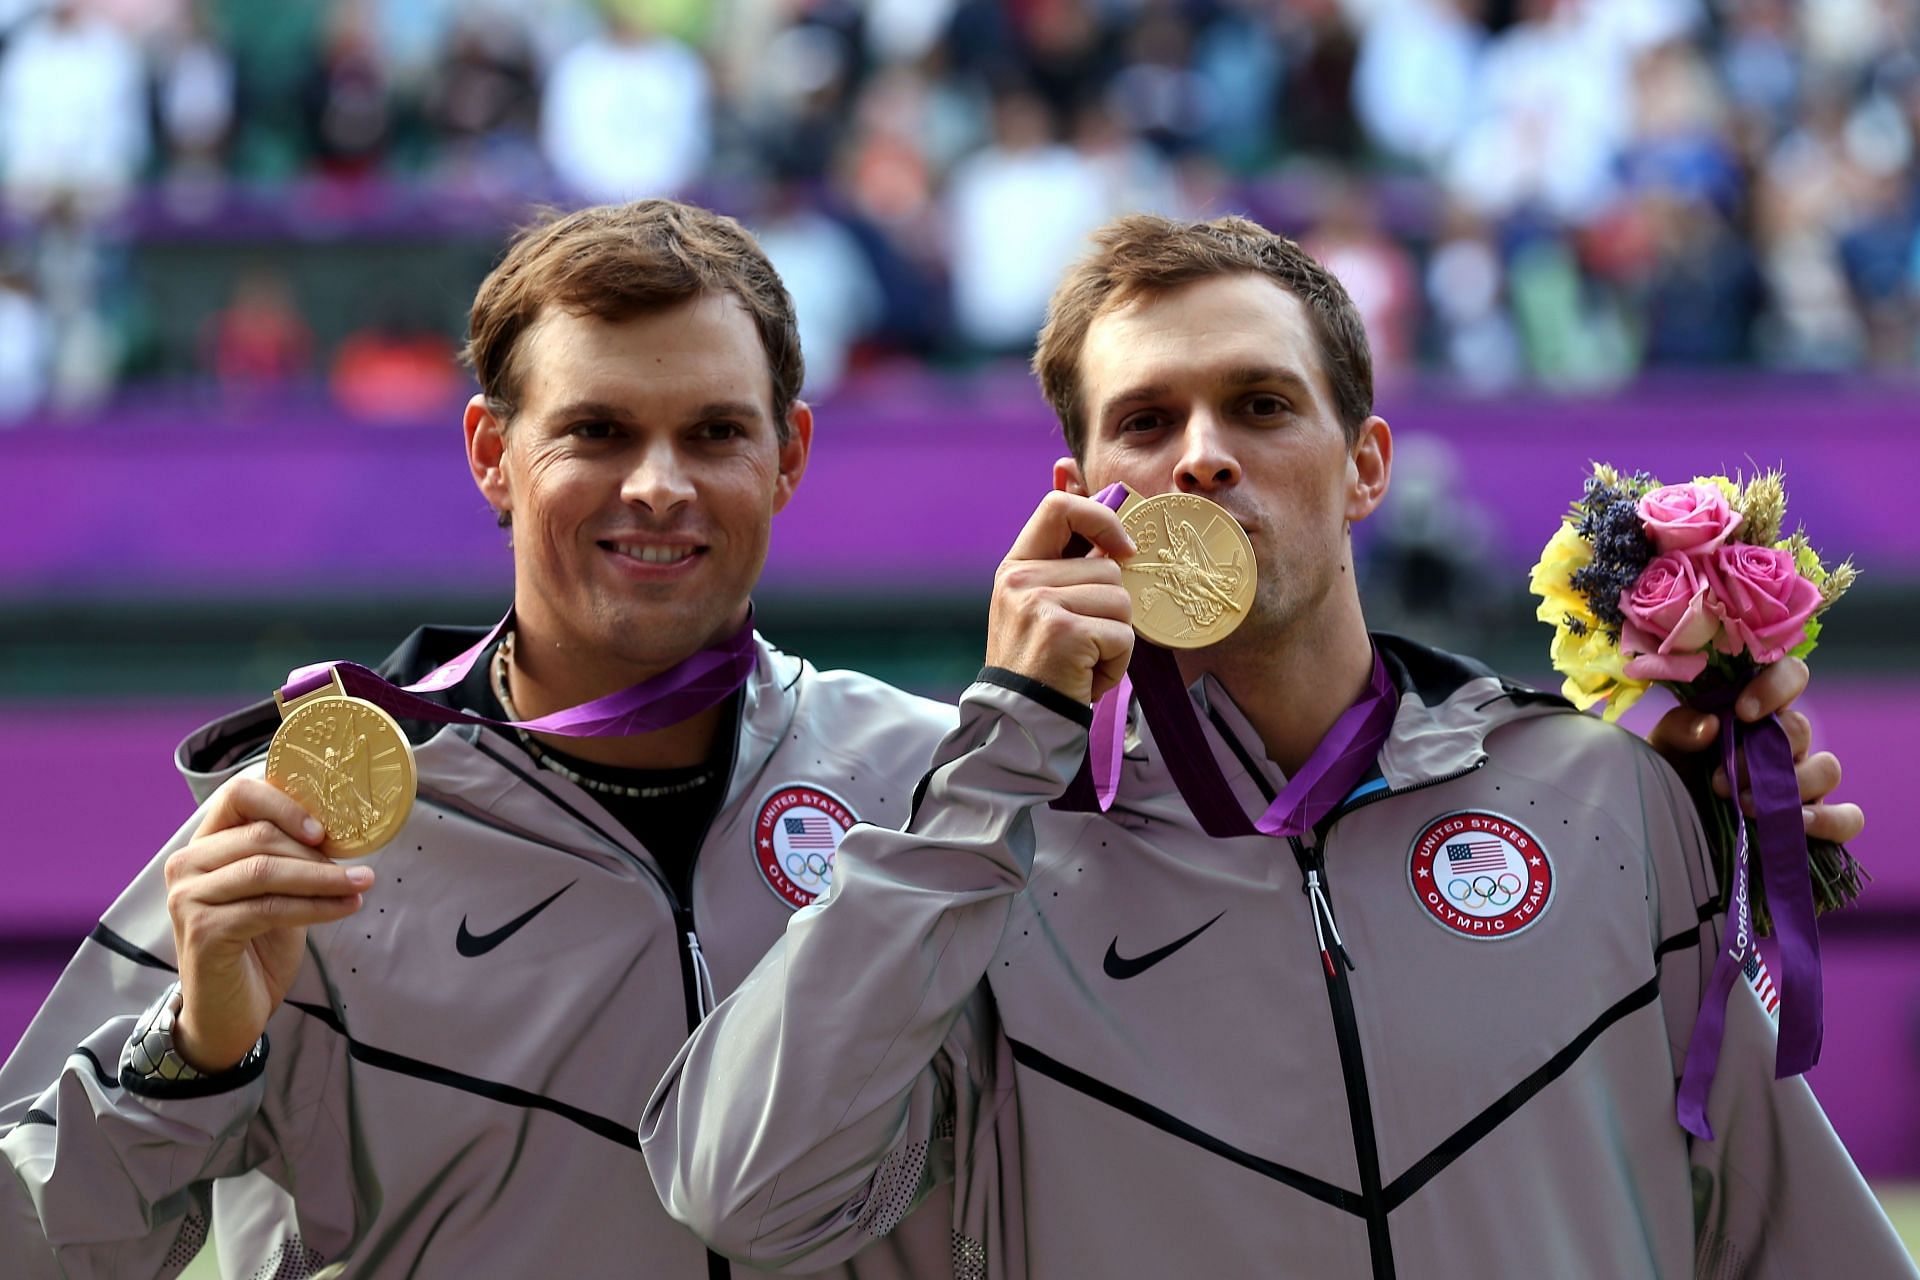 The Bryan brothers with their gold medals at the 2012 London Olympic games